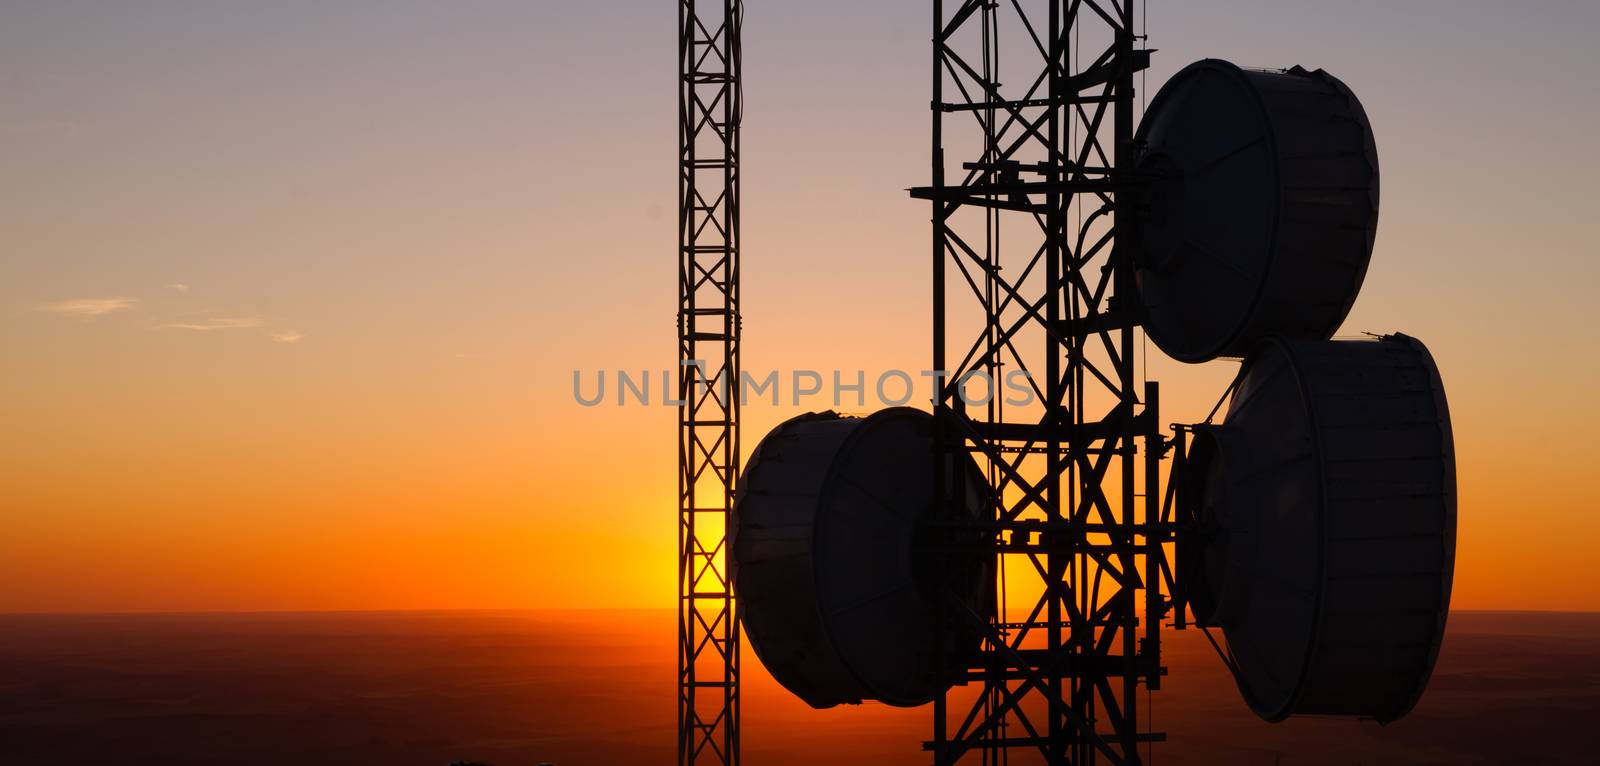 Cellular Radio Wave Communication Towers Evening Sunset Horizon by ChrisBoswell